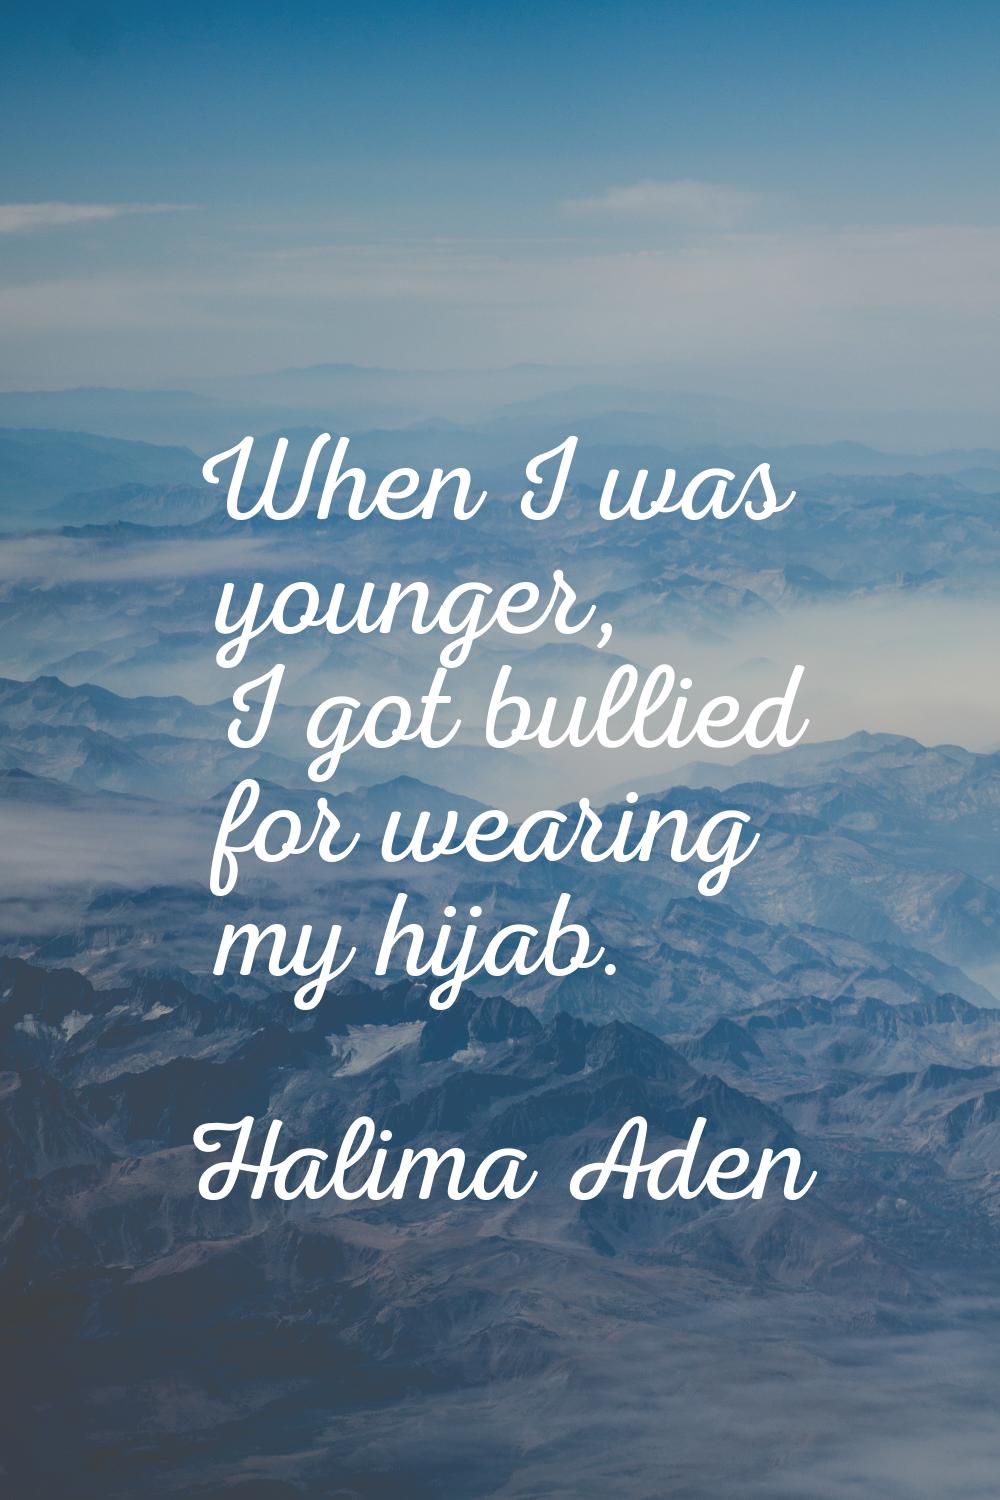 When I was younger, I got bullied for wearing my hijab.